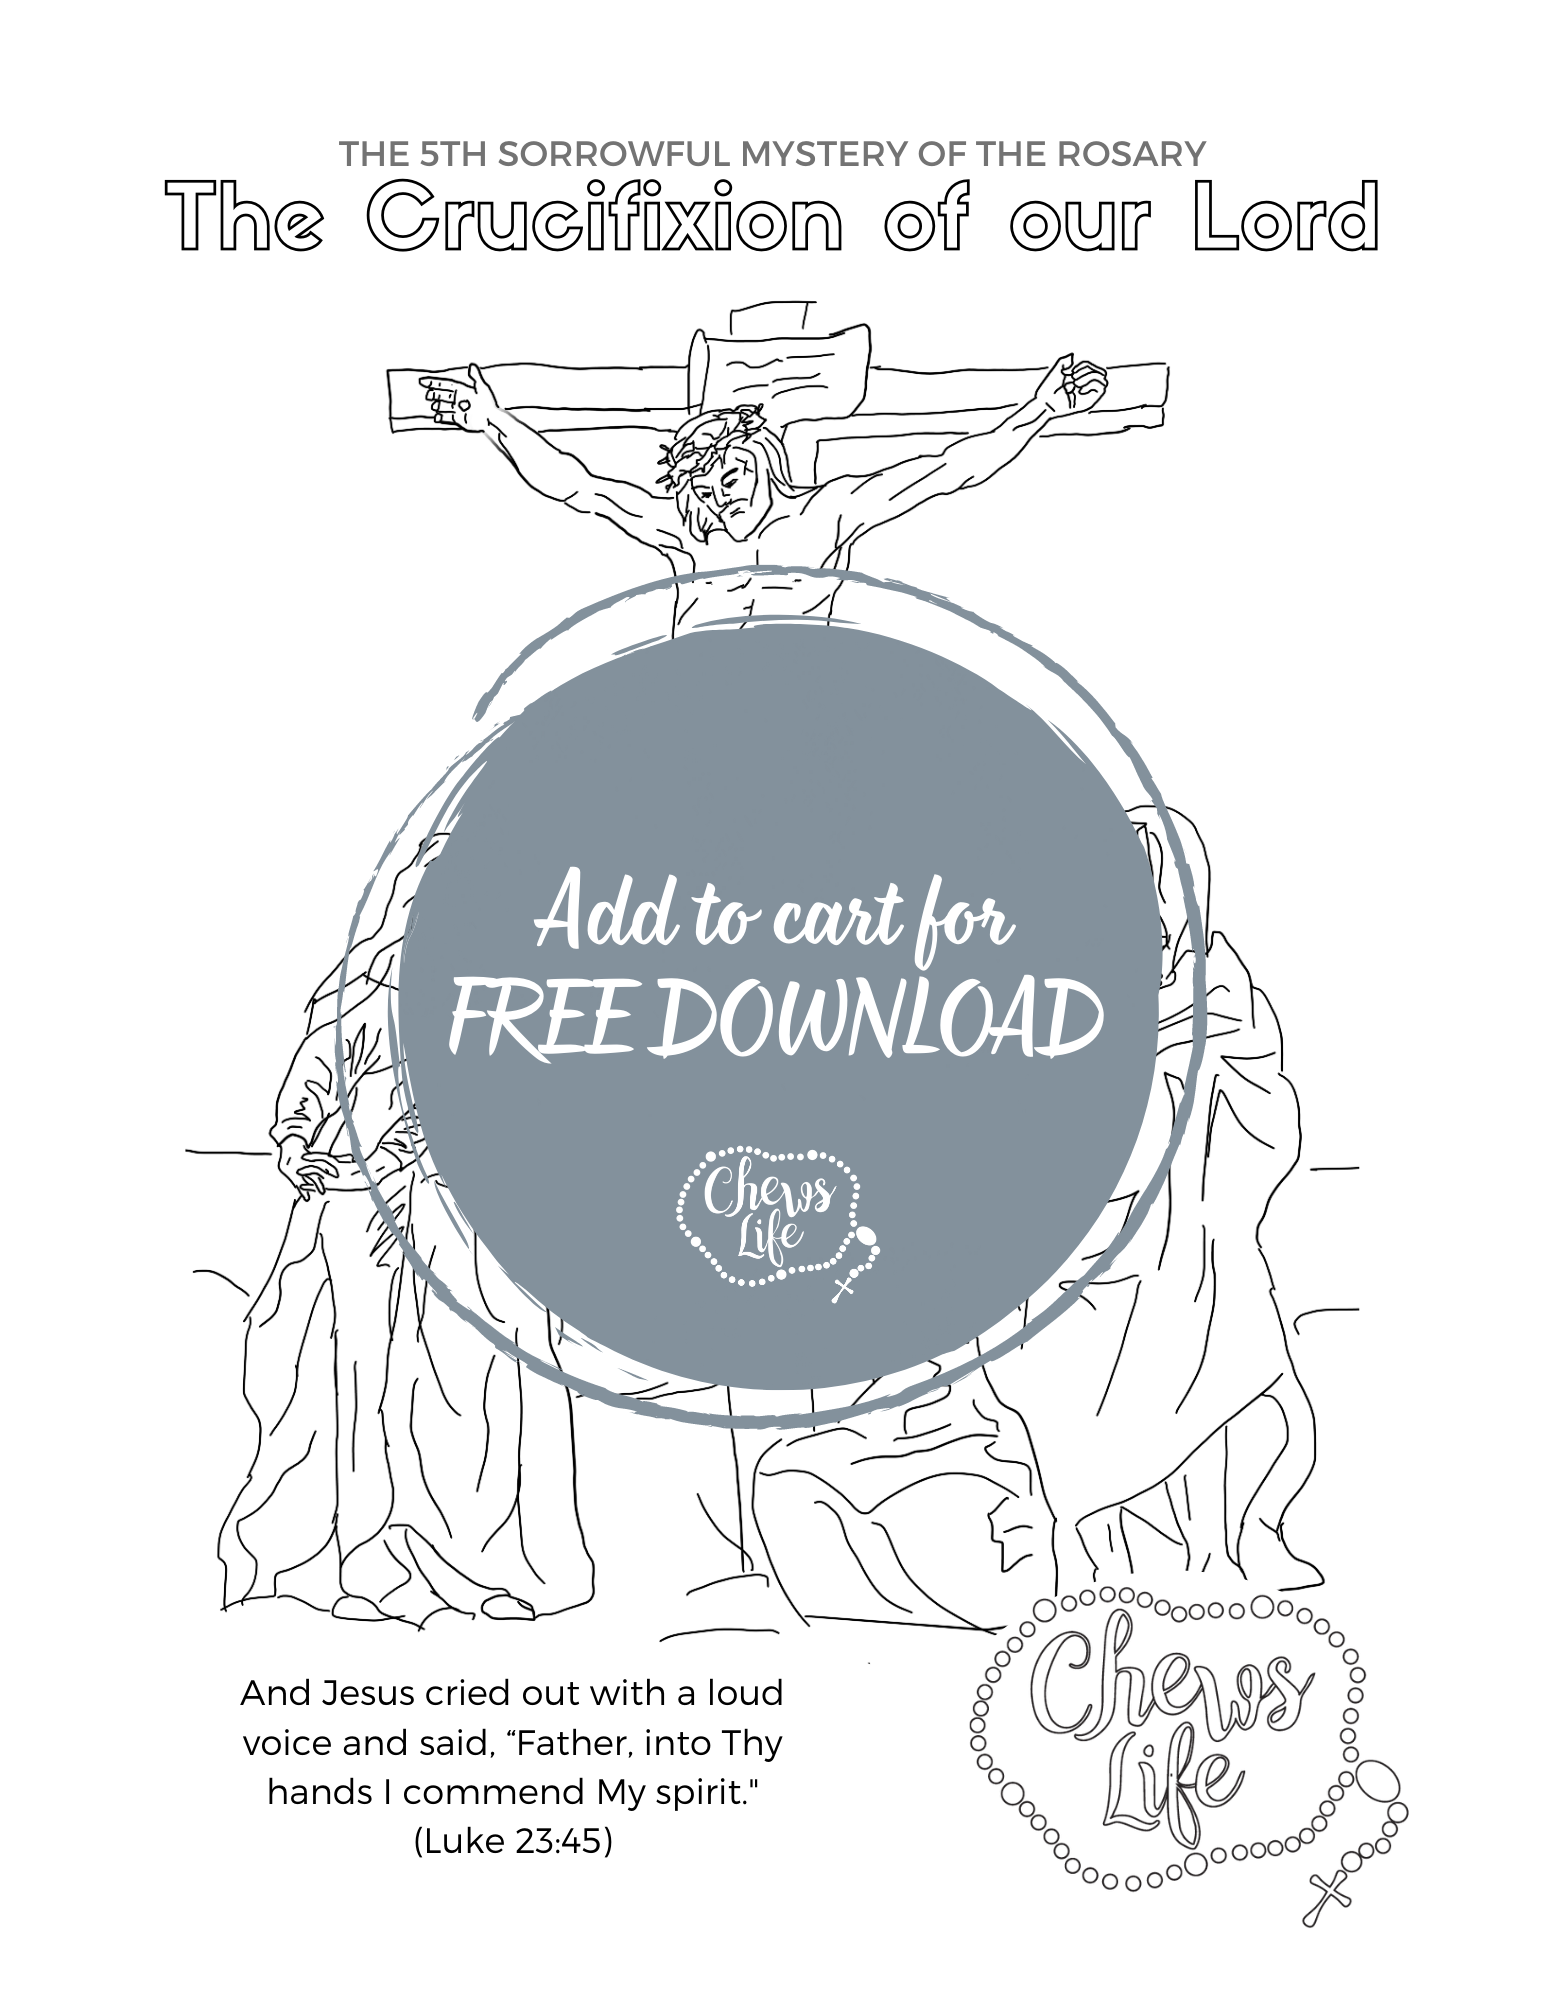 chews-life-coloring-pages-sorrowful-mysteries-of-the-rosary-31349551431856.png